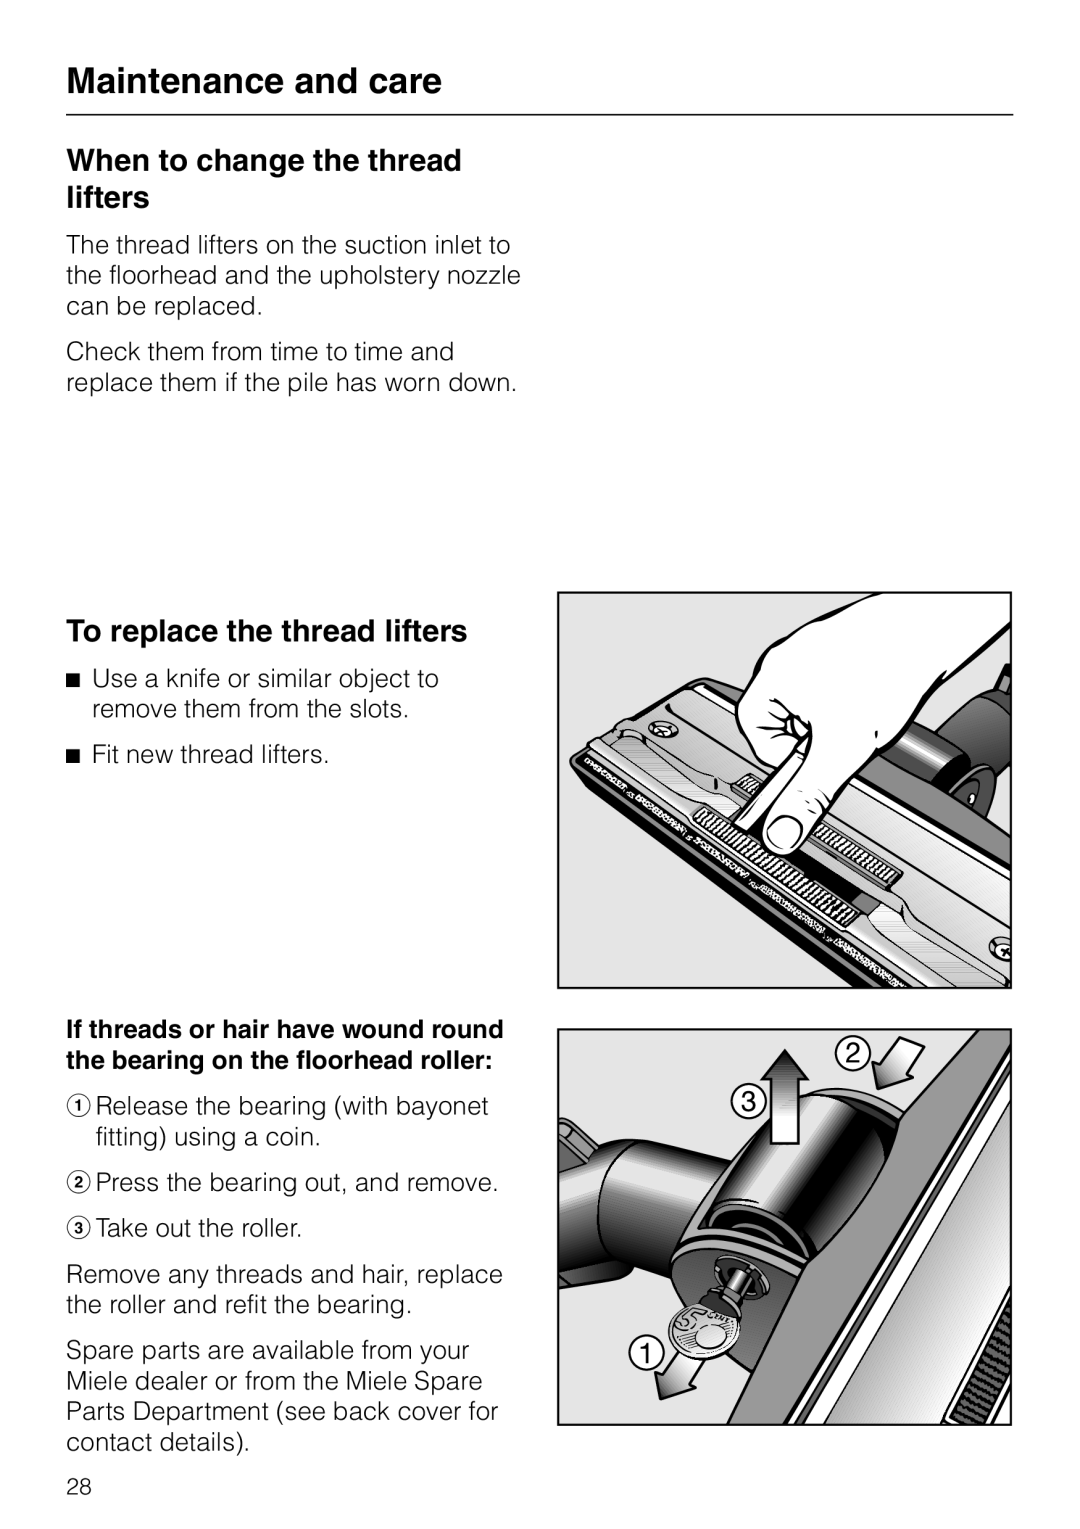 Miele S 5980 manual When to change the thread lifters, To replace the thread lifters, Maintenance and care 